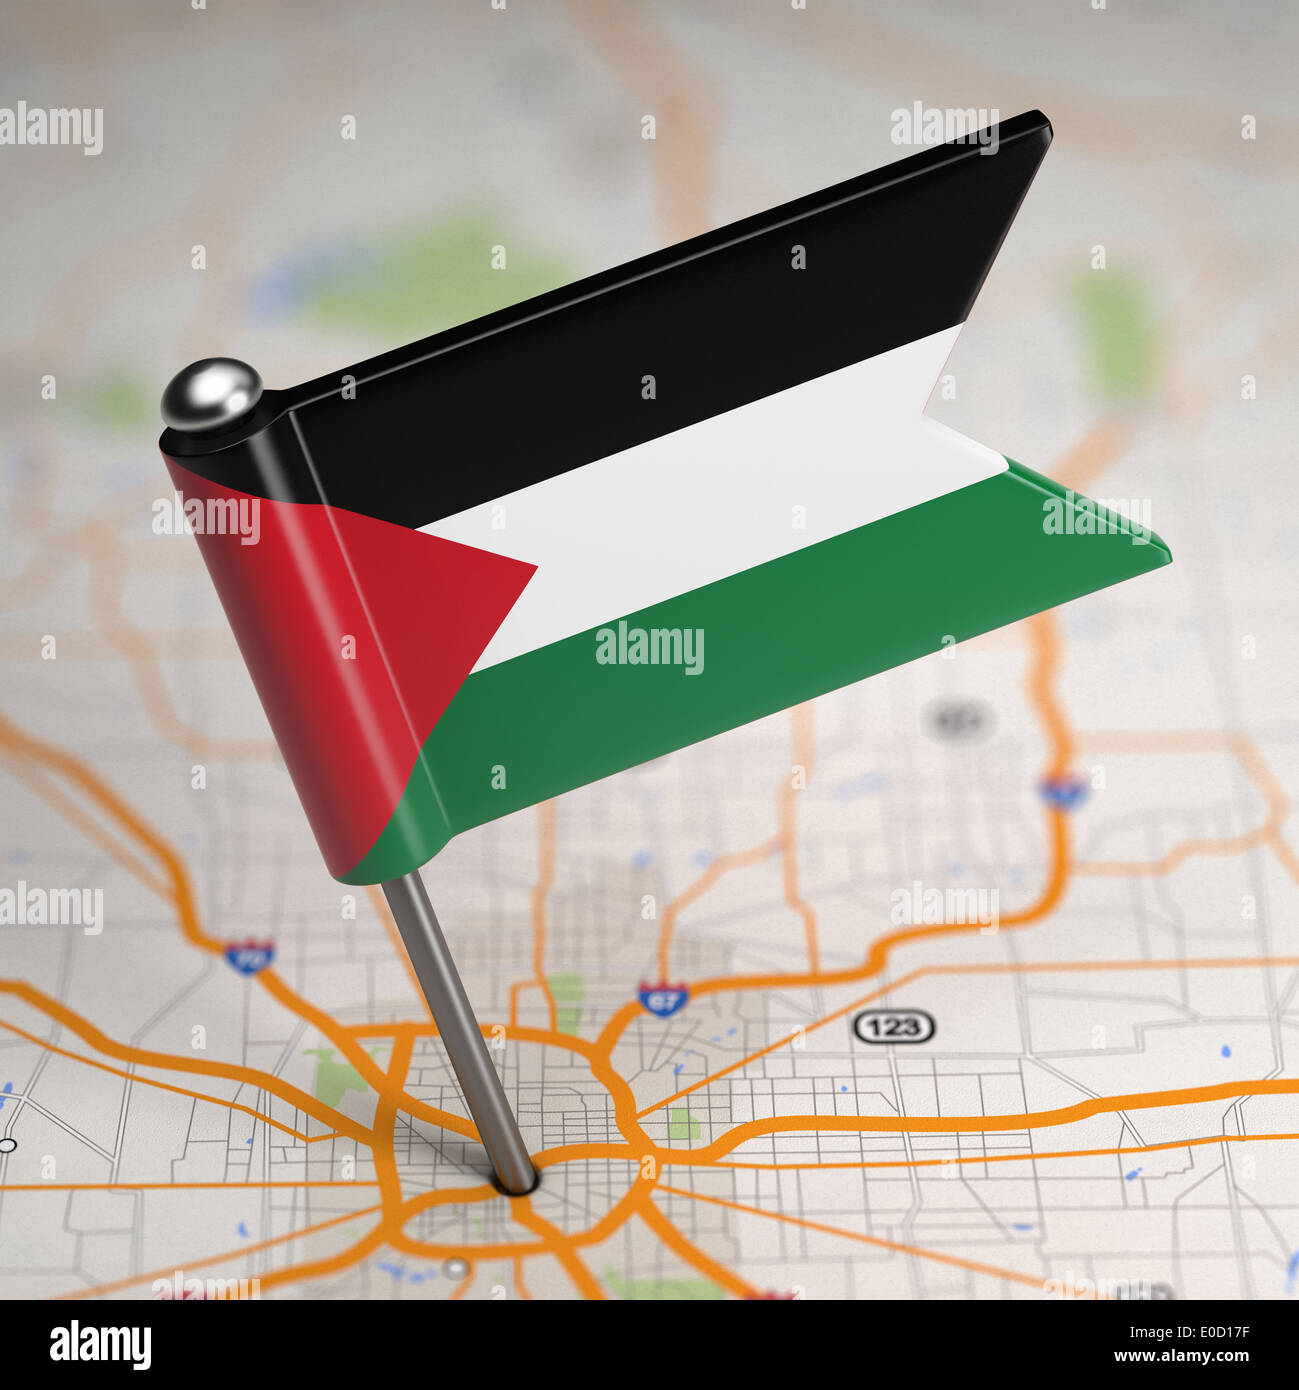 Palestine Small Flag on a Map Background. Stock Photo